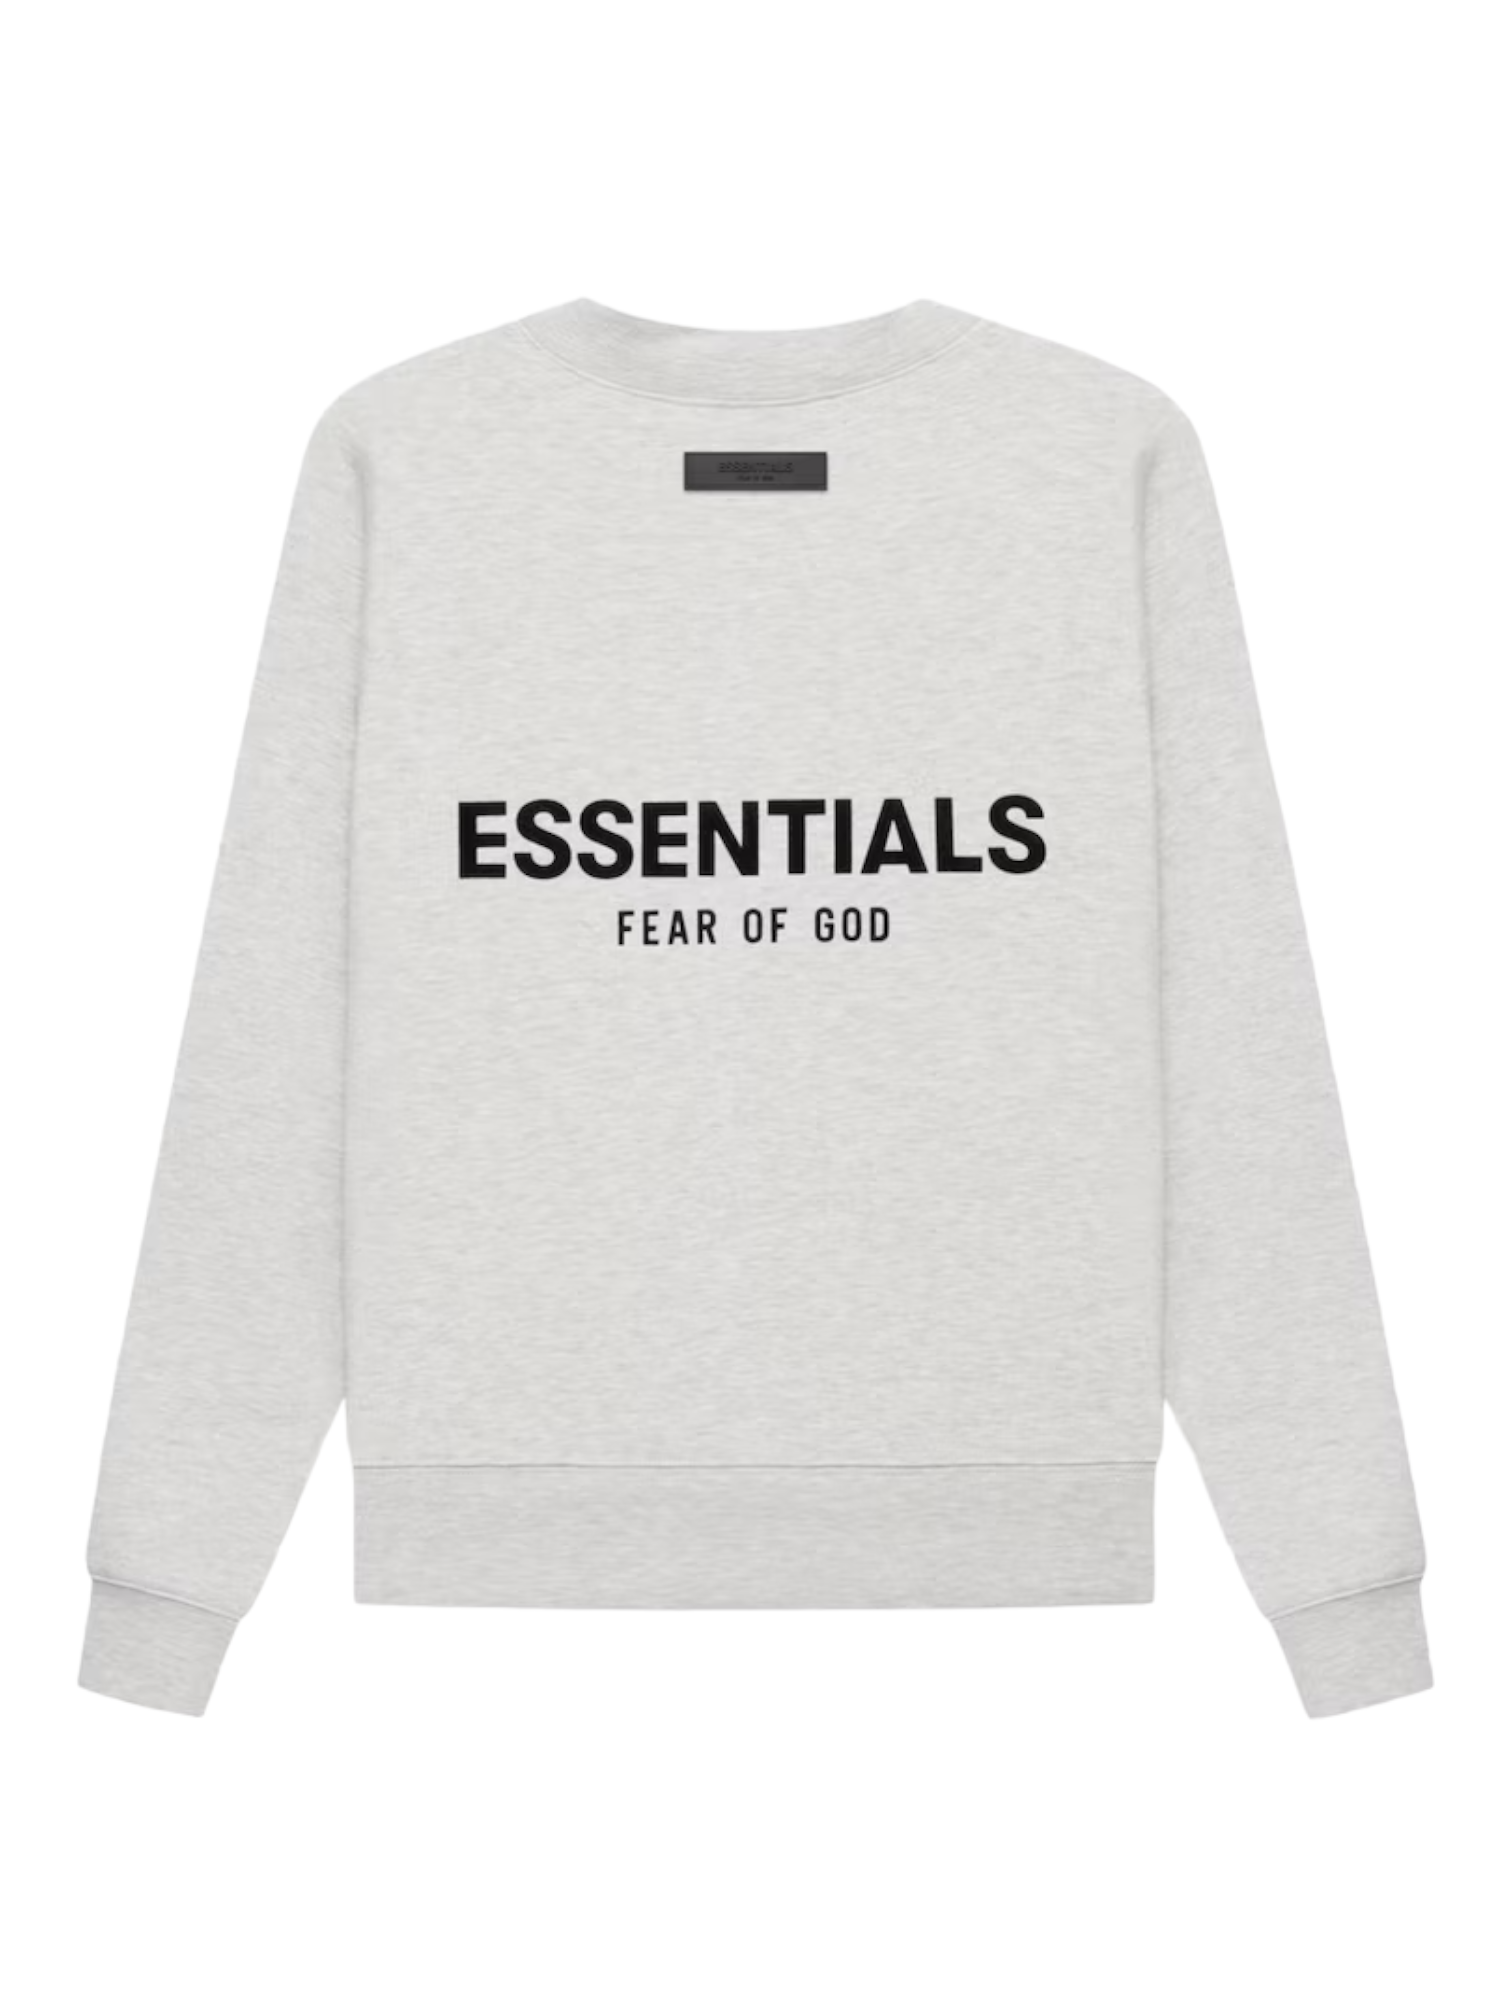 Fear of God Essentials Hoodie Light Oatmeal for Men & Woman Sizes  XS/S/M/L/XL